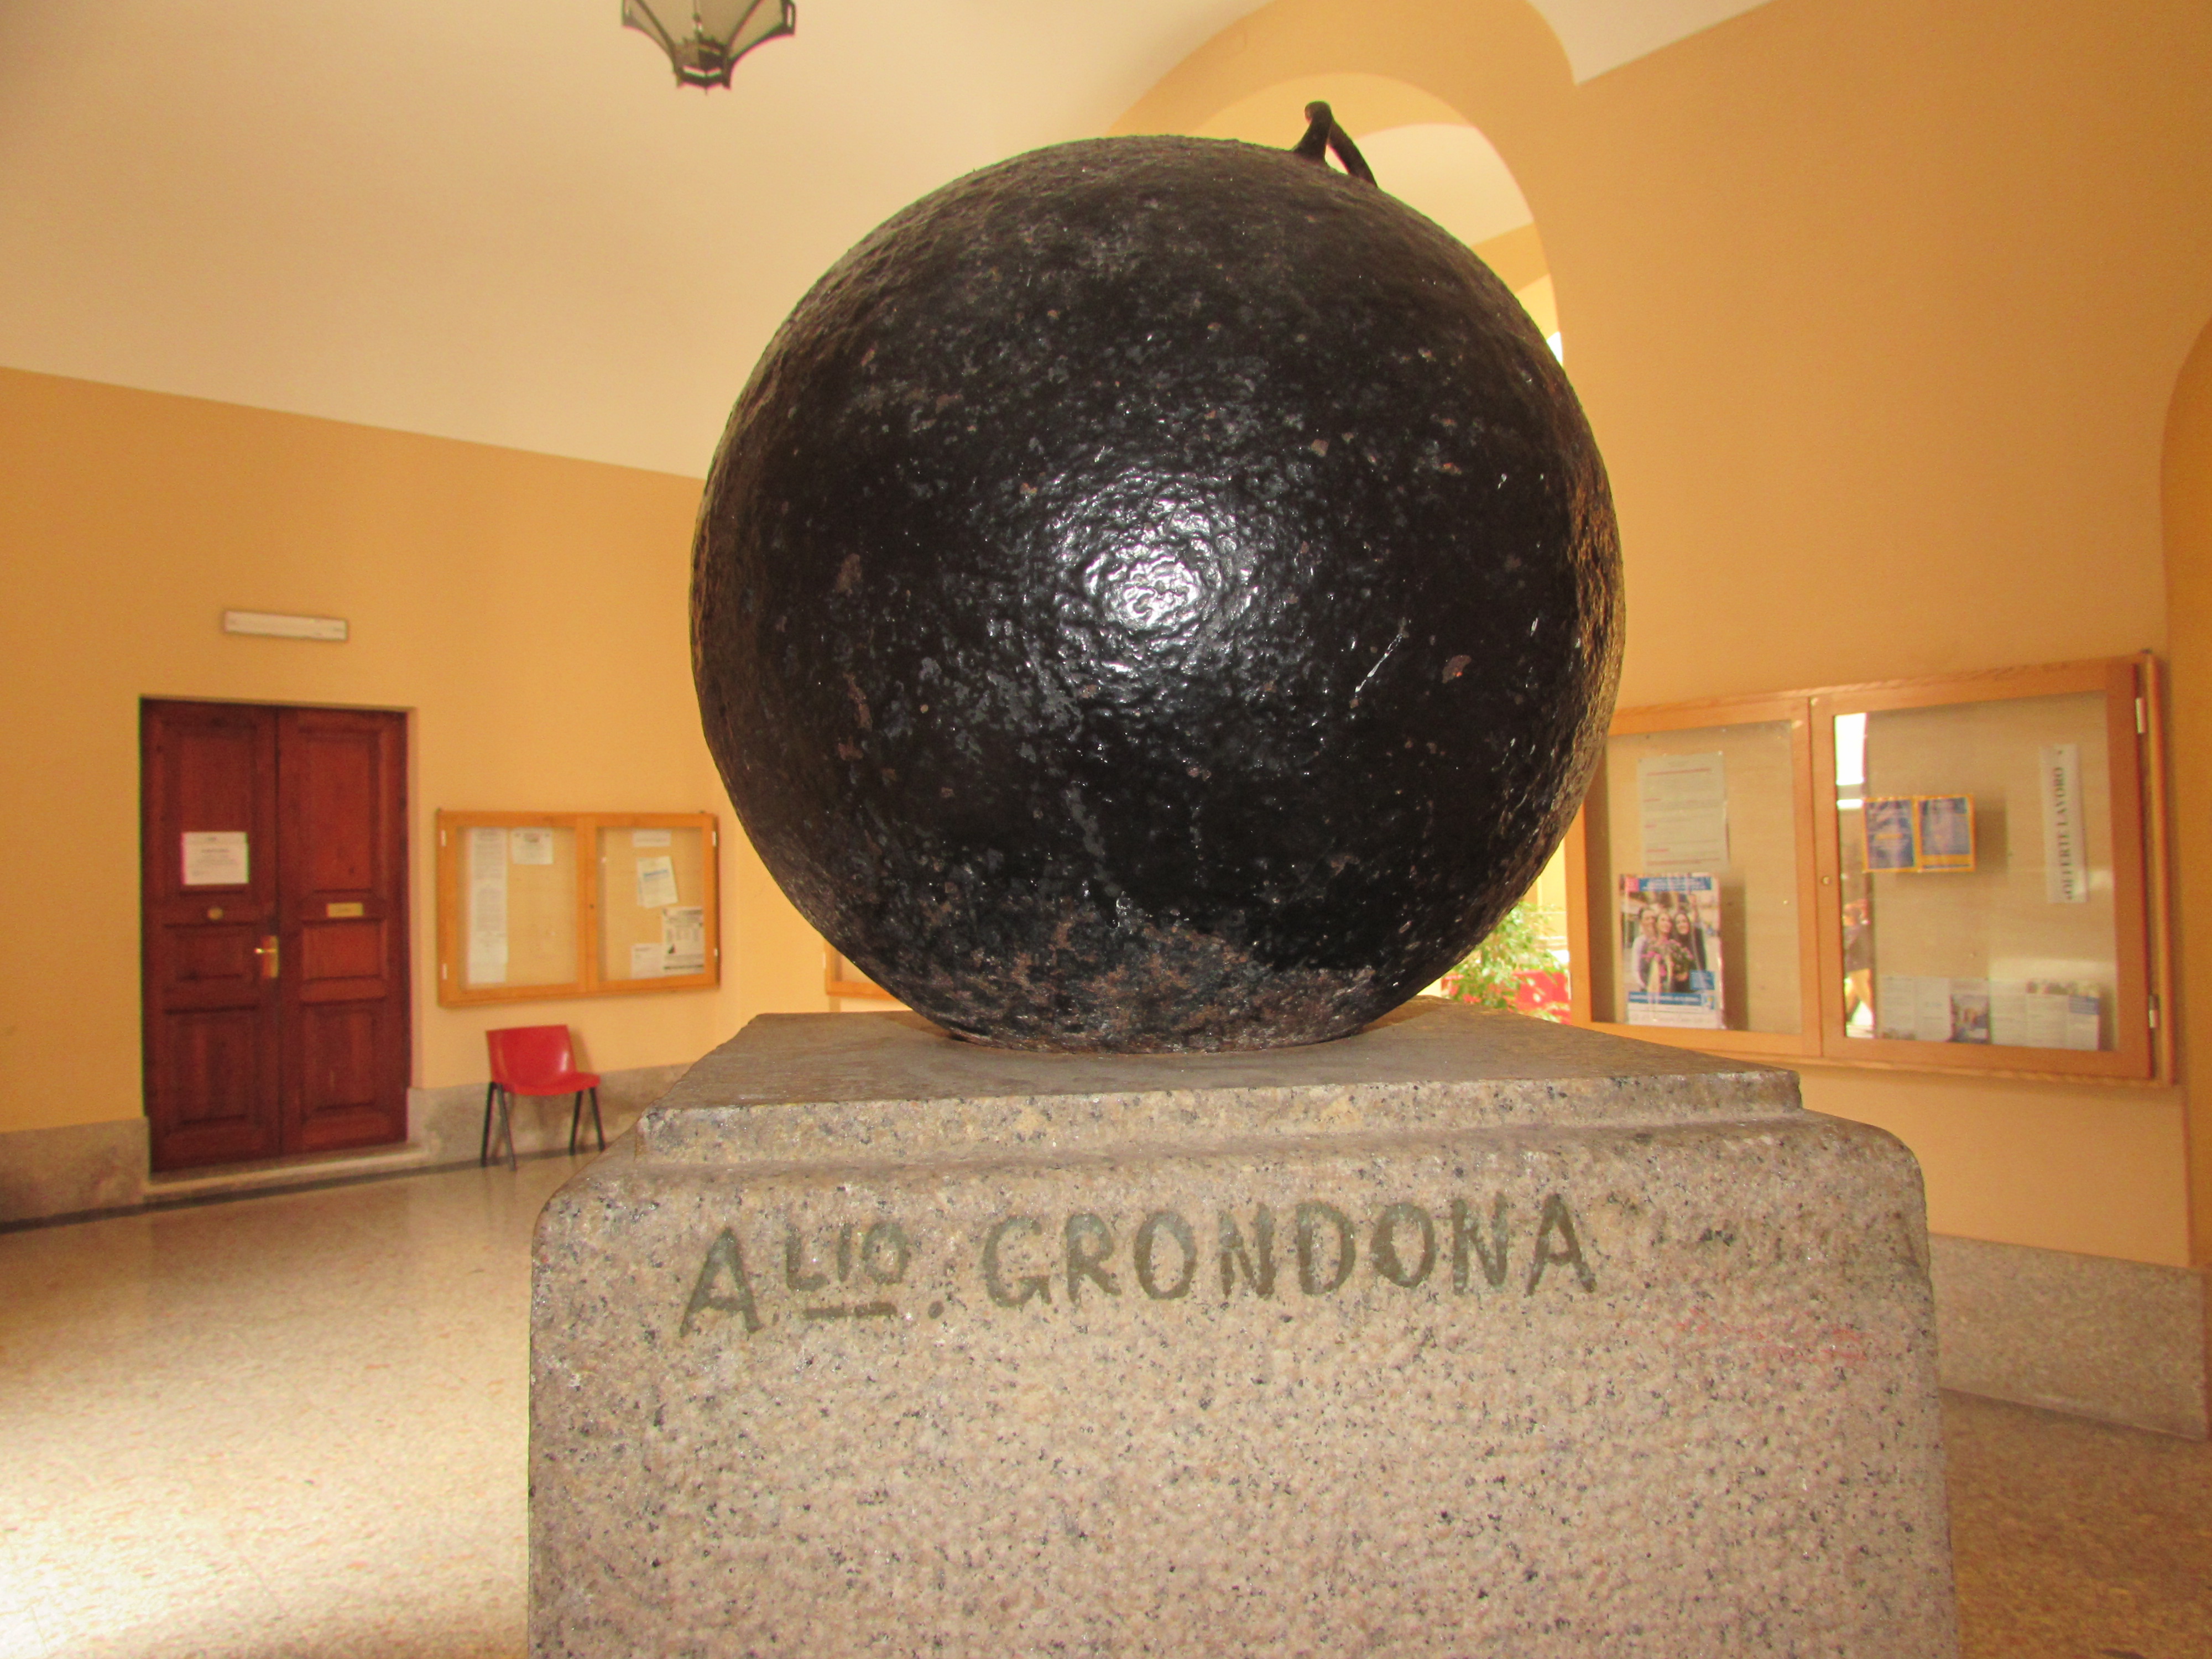 One of the "Napoleon bombs" at the town hall of La Maddalena